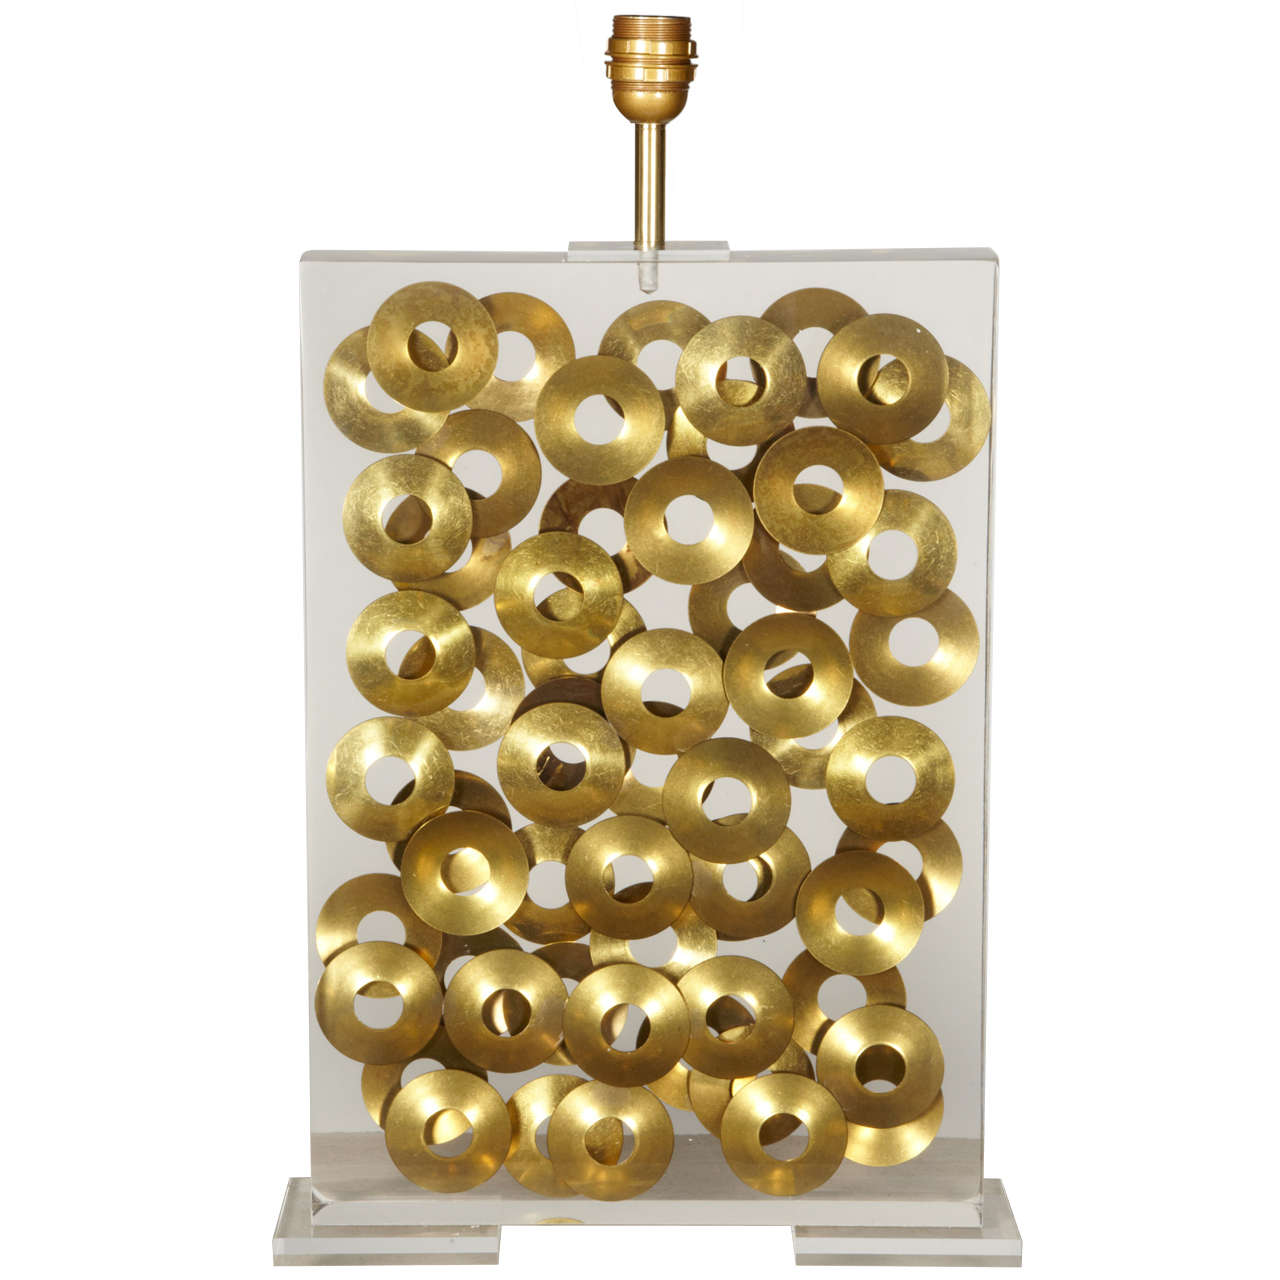 Awesome Lucite Lamp with Brass Rings Inclusion by Romeo For Sale